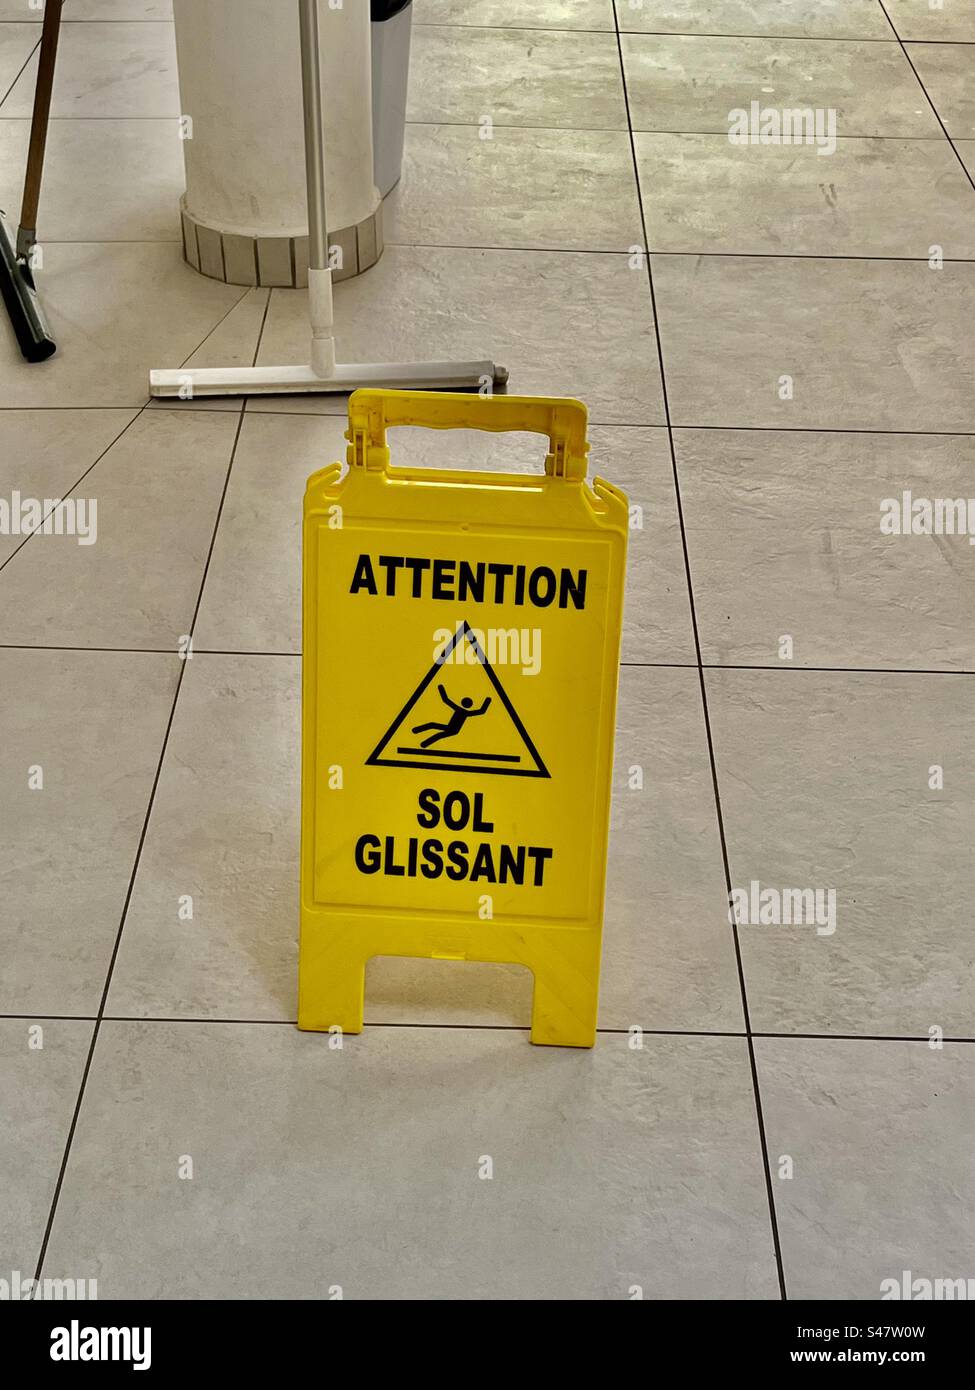 Wet floor sign French attention sol glissant slippery surface person slipping over fall falling pool wet water environment shower bathroom yellow signage squeegee sweeper France Stock Photo